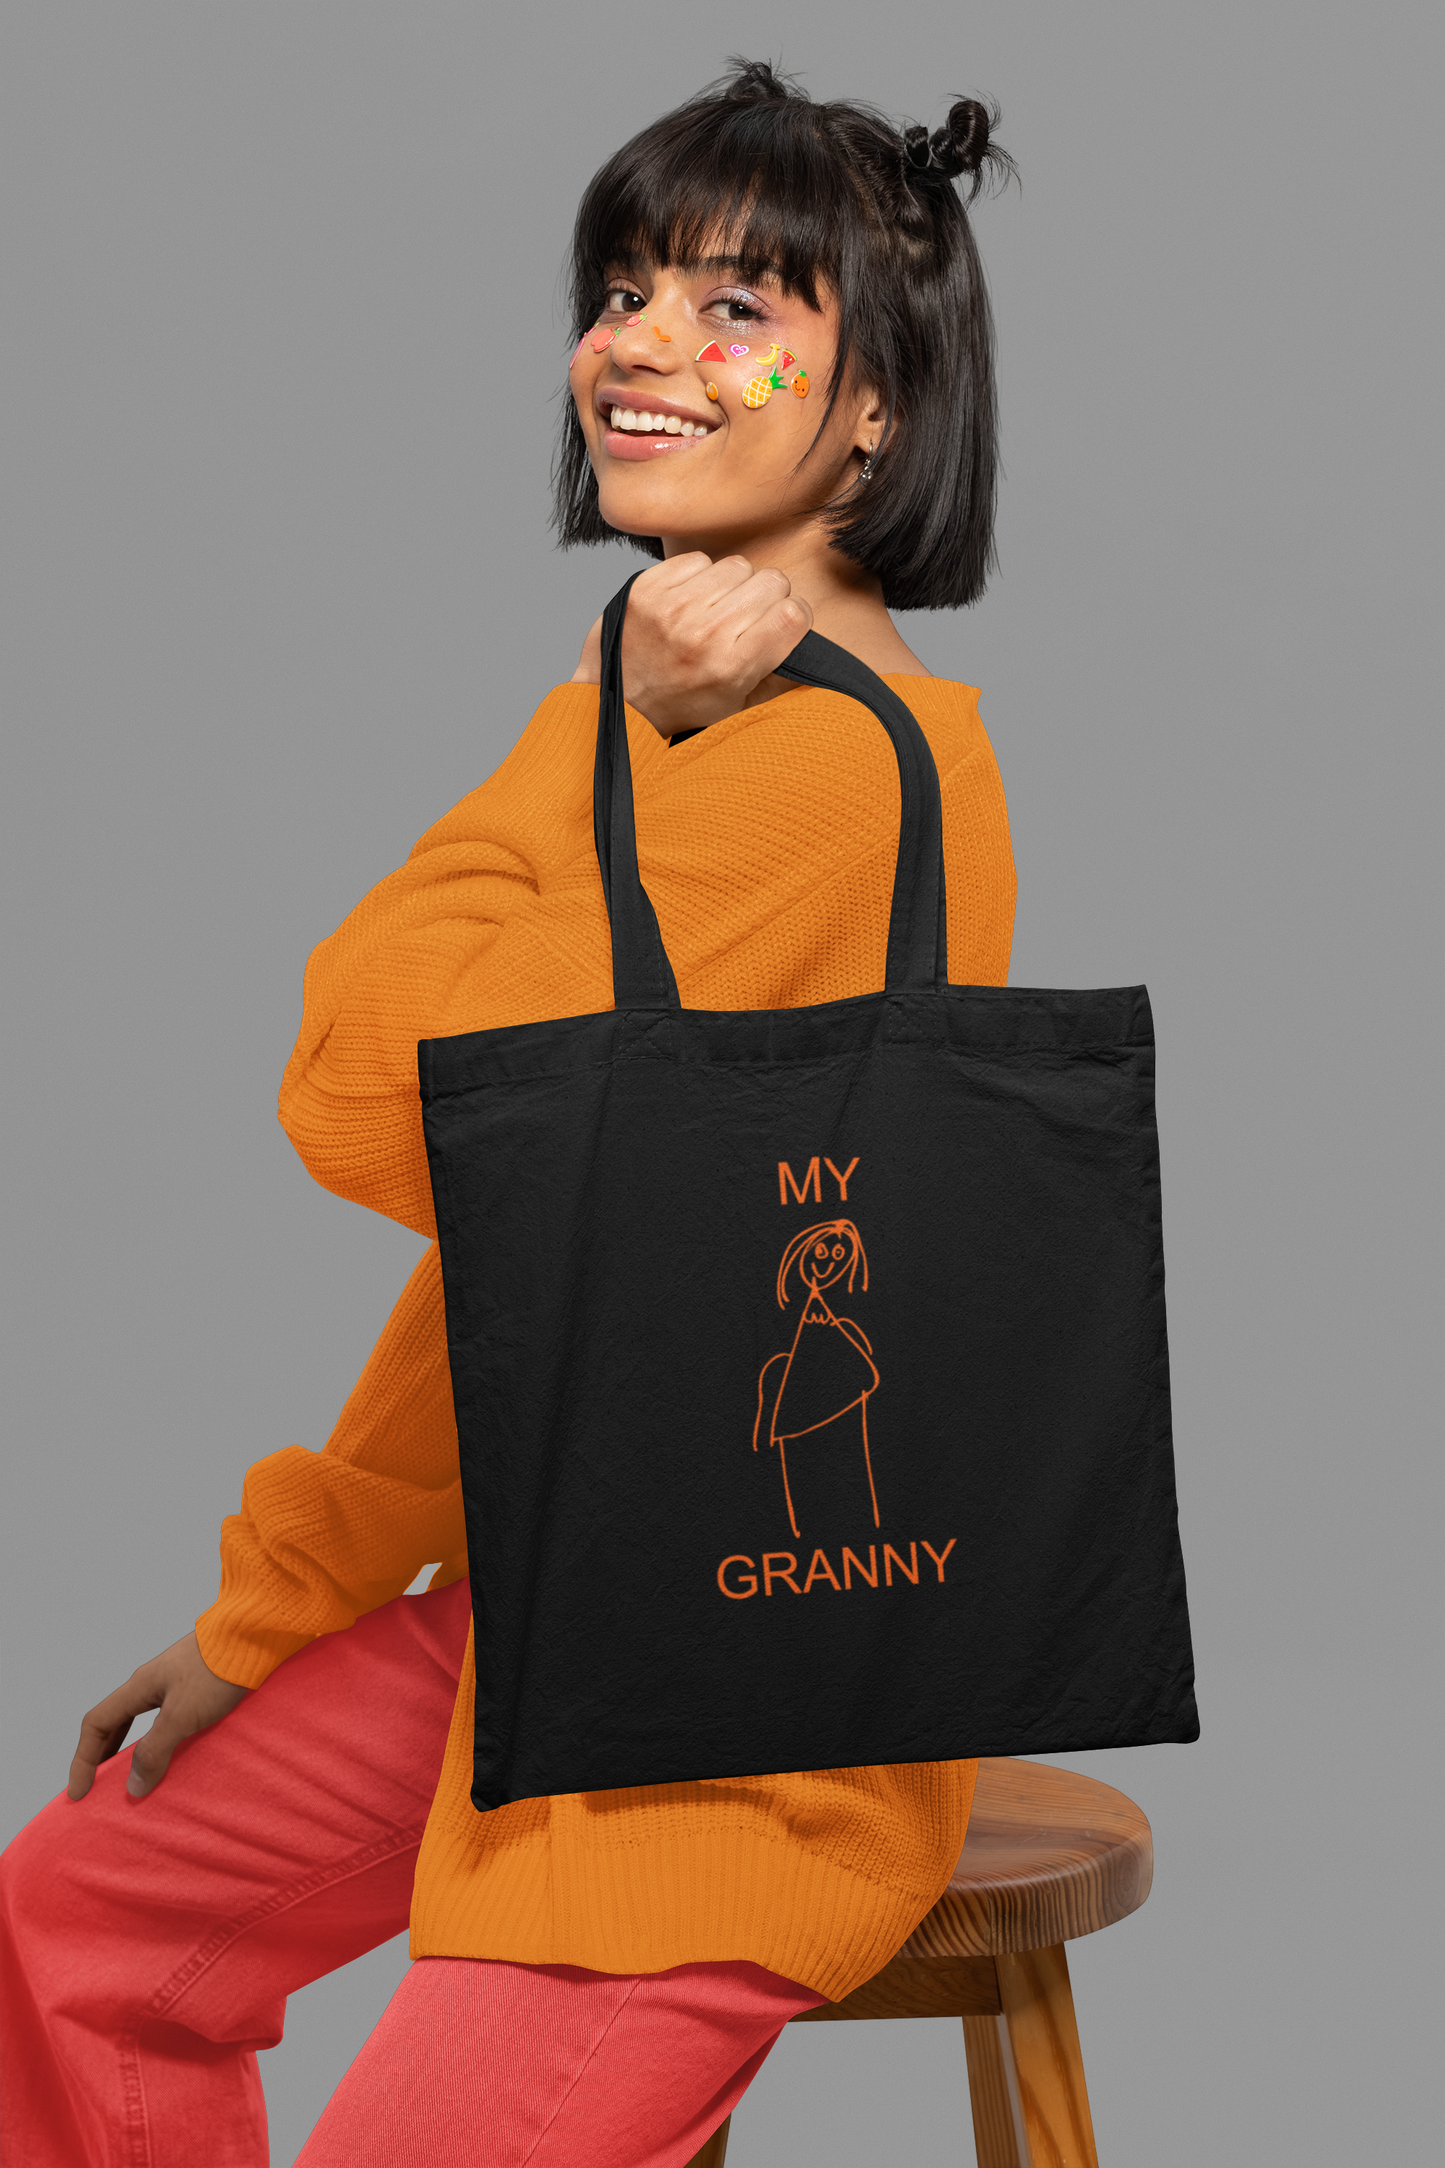 Personalised tote bag with child's drawing